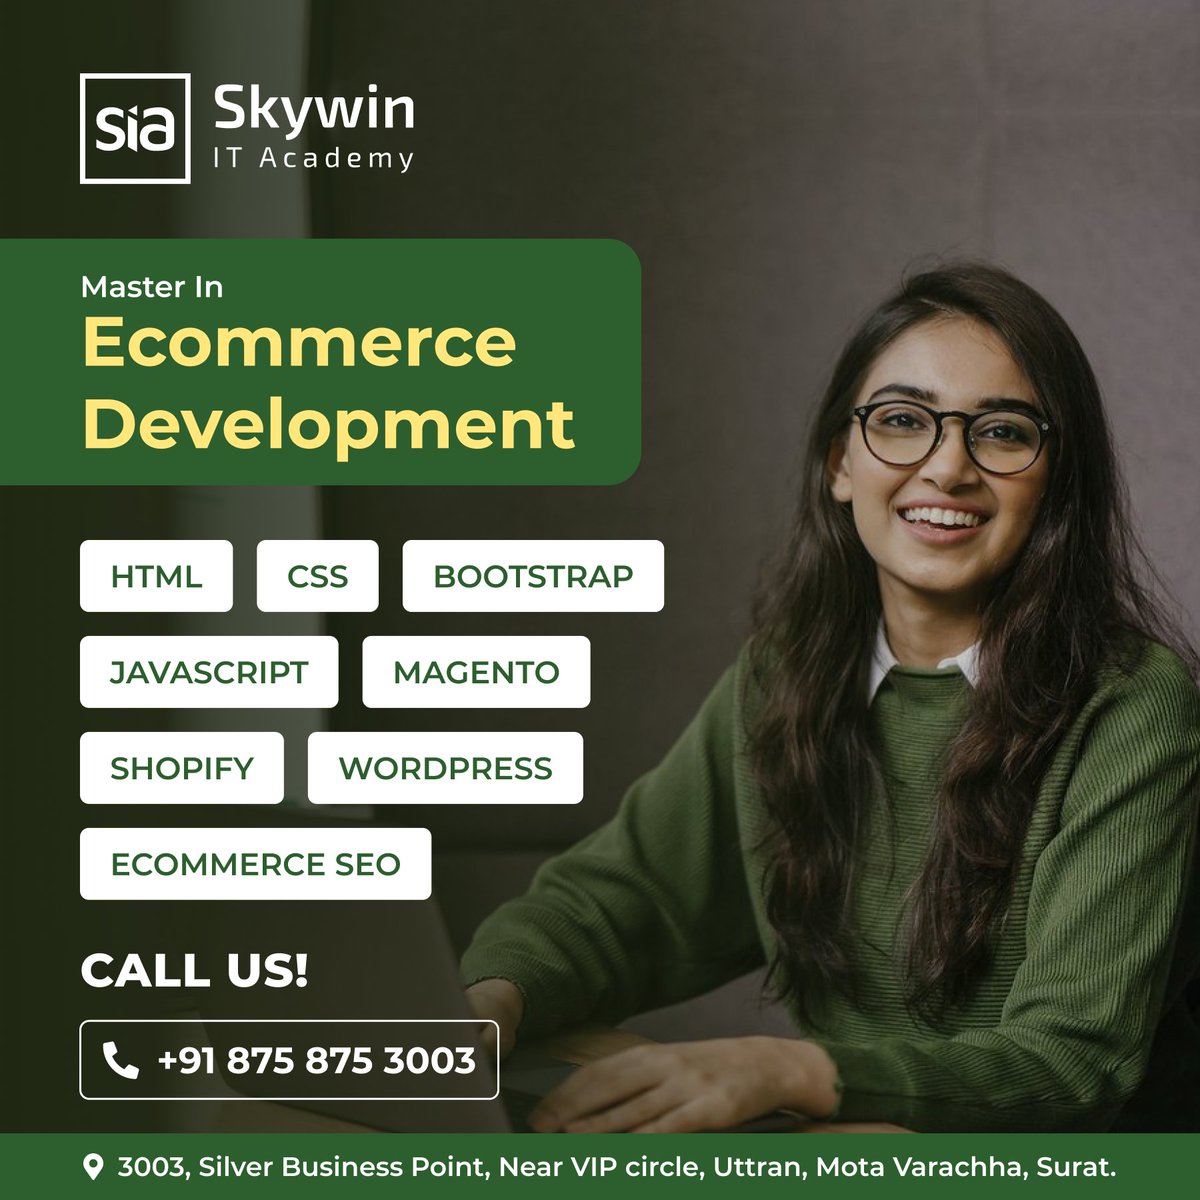 Want to master e-commerce development?
Join us at Skywin IT Academy and learn the languages of IT that will power your success!

#EcommerceExpert #ecommercedevelopment #LearnIT #skywinitacademy #itcourse #itacademy #itinstitute #surat